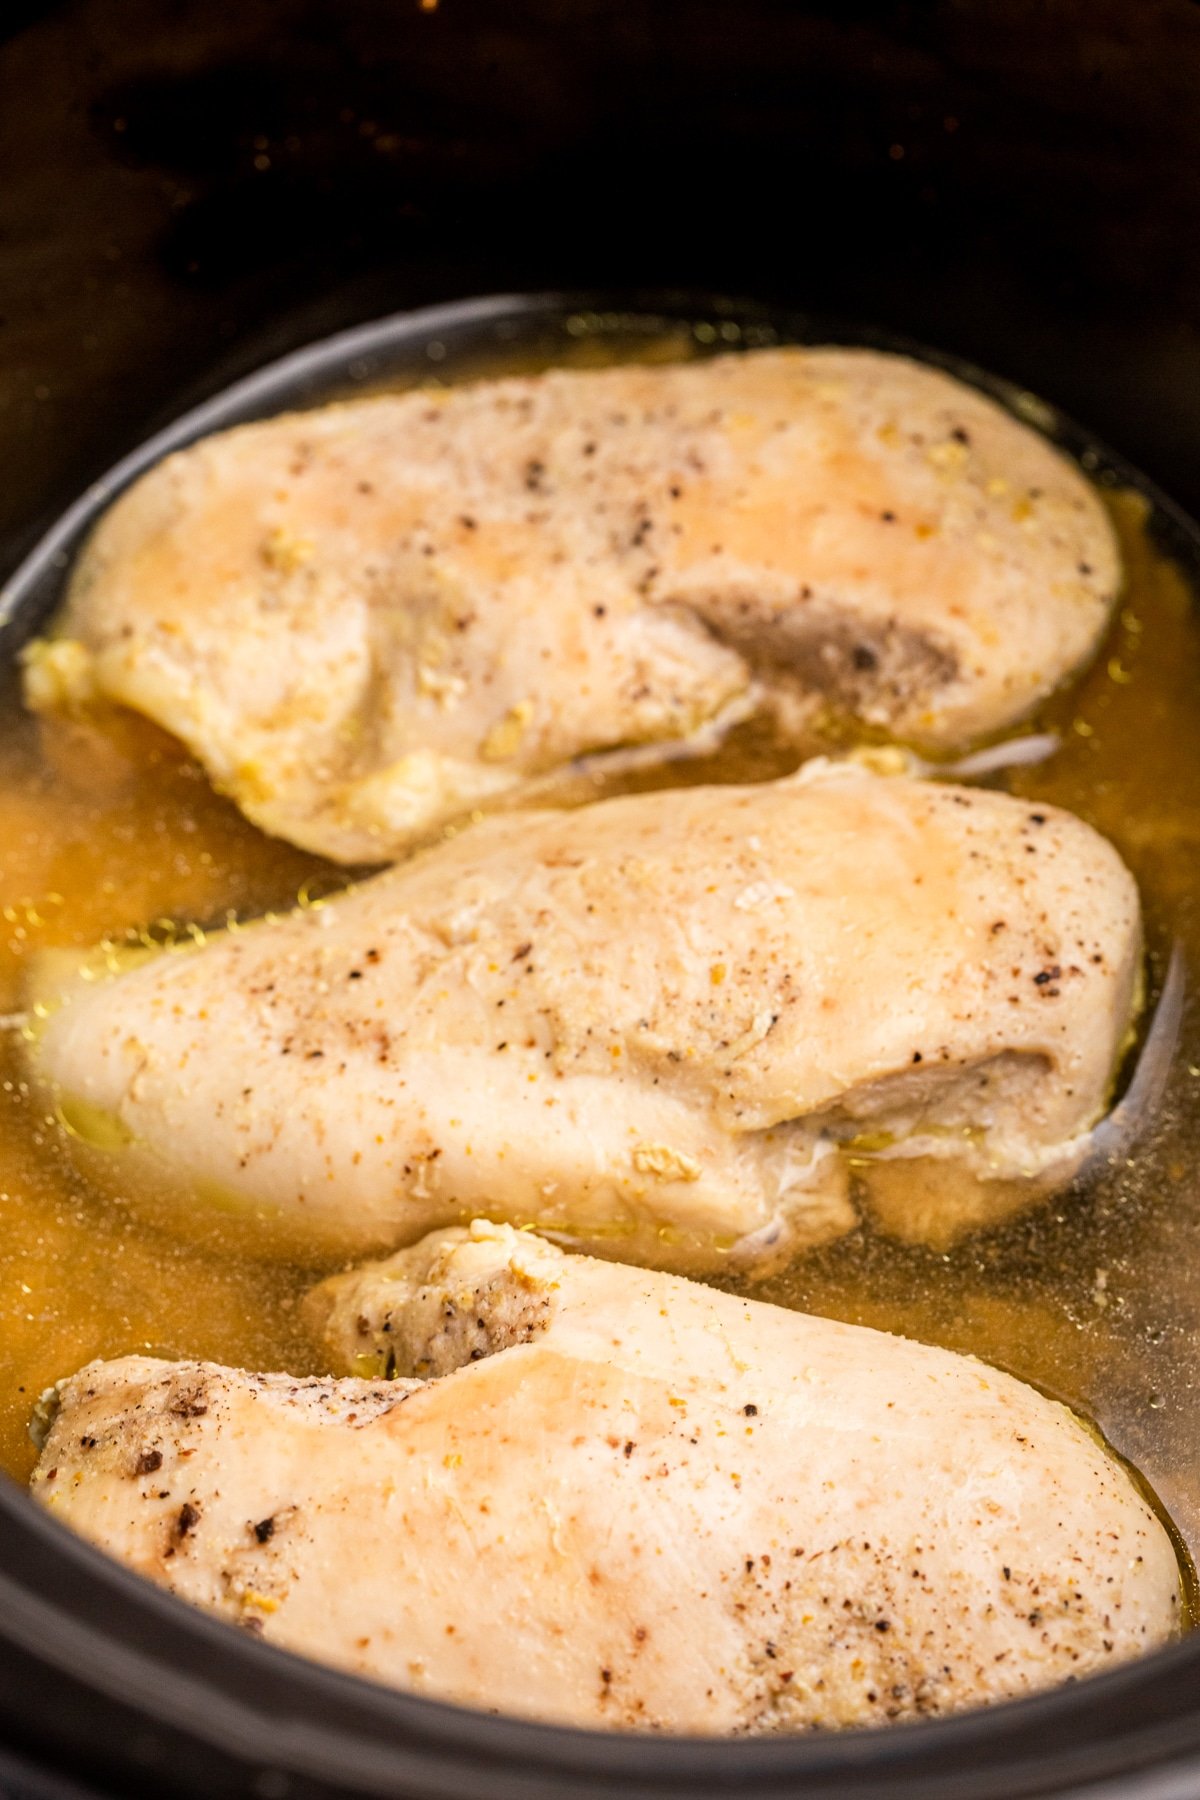 Chicken breasts cooked in a crockpot.